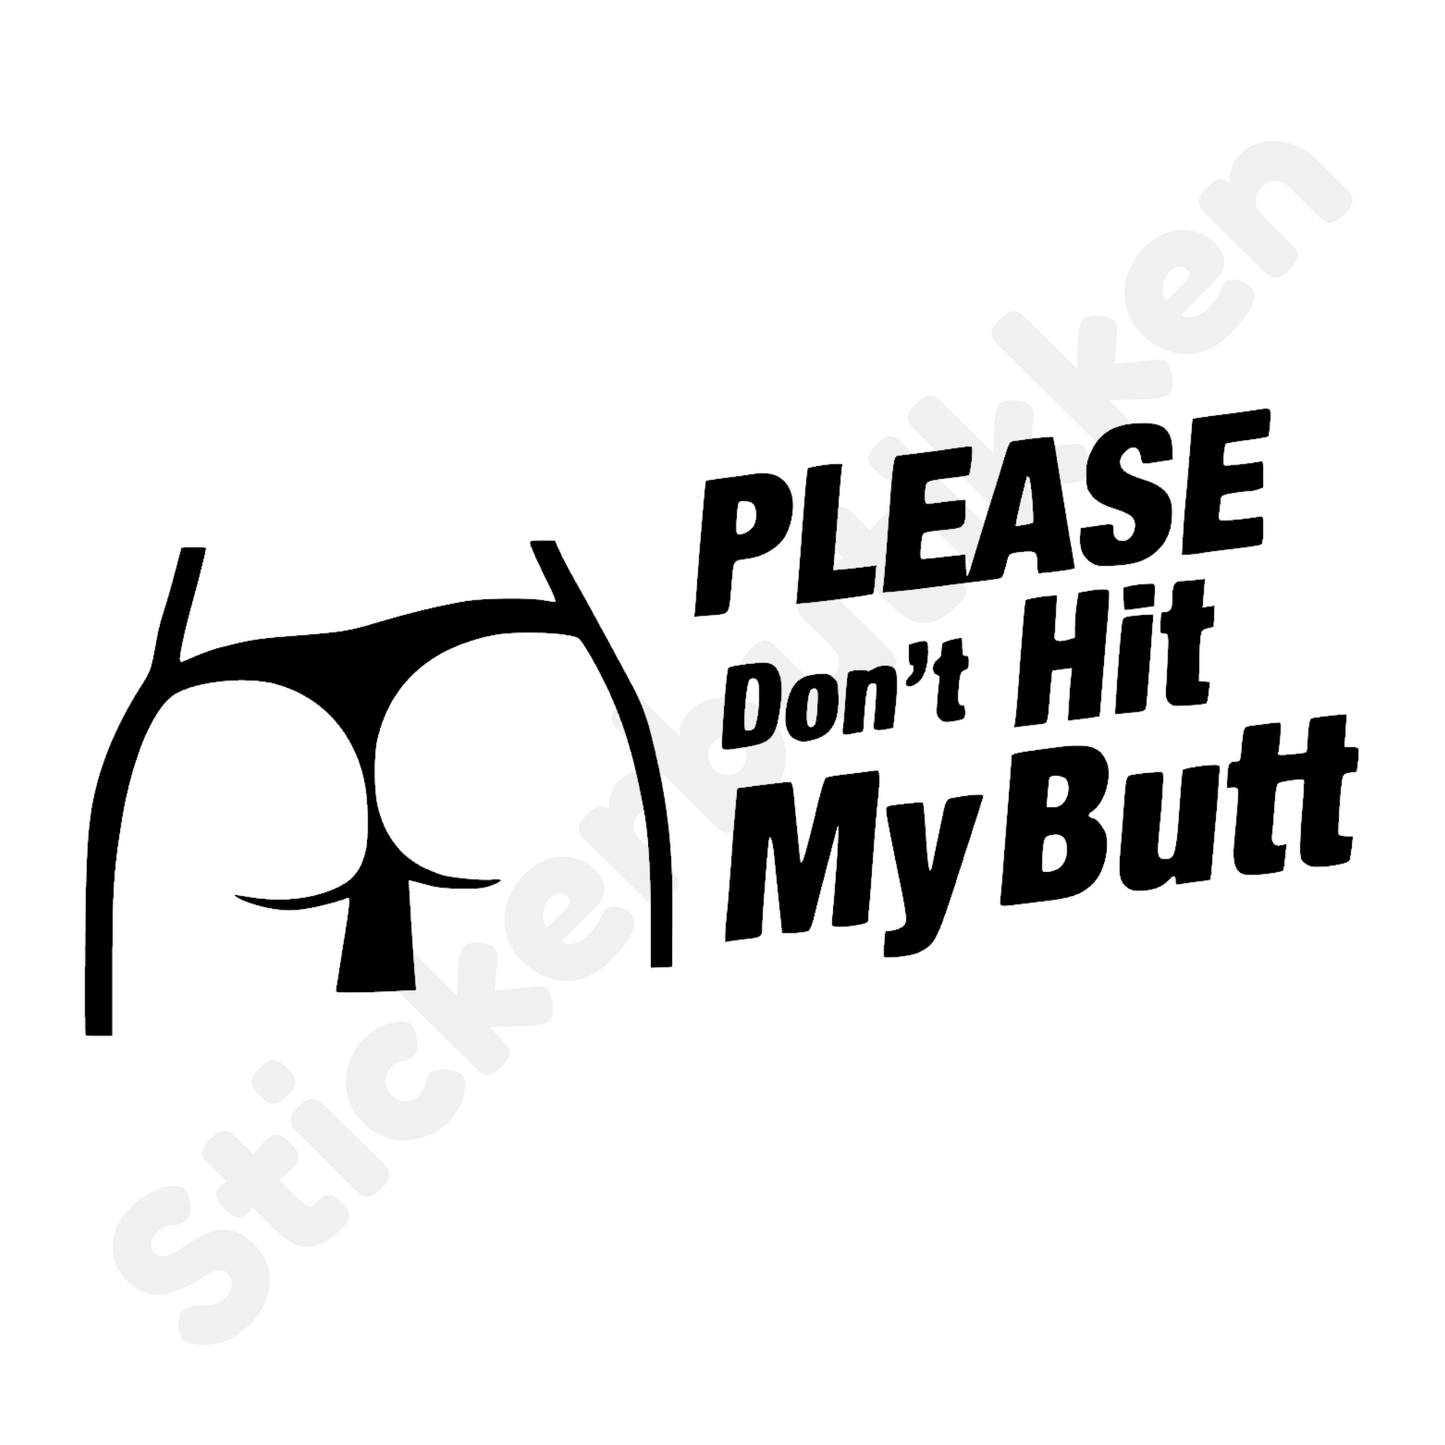 Please don't hit my but